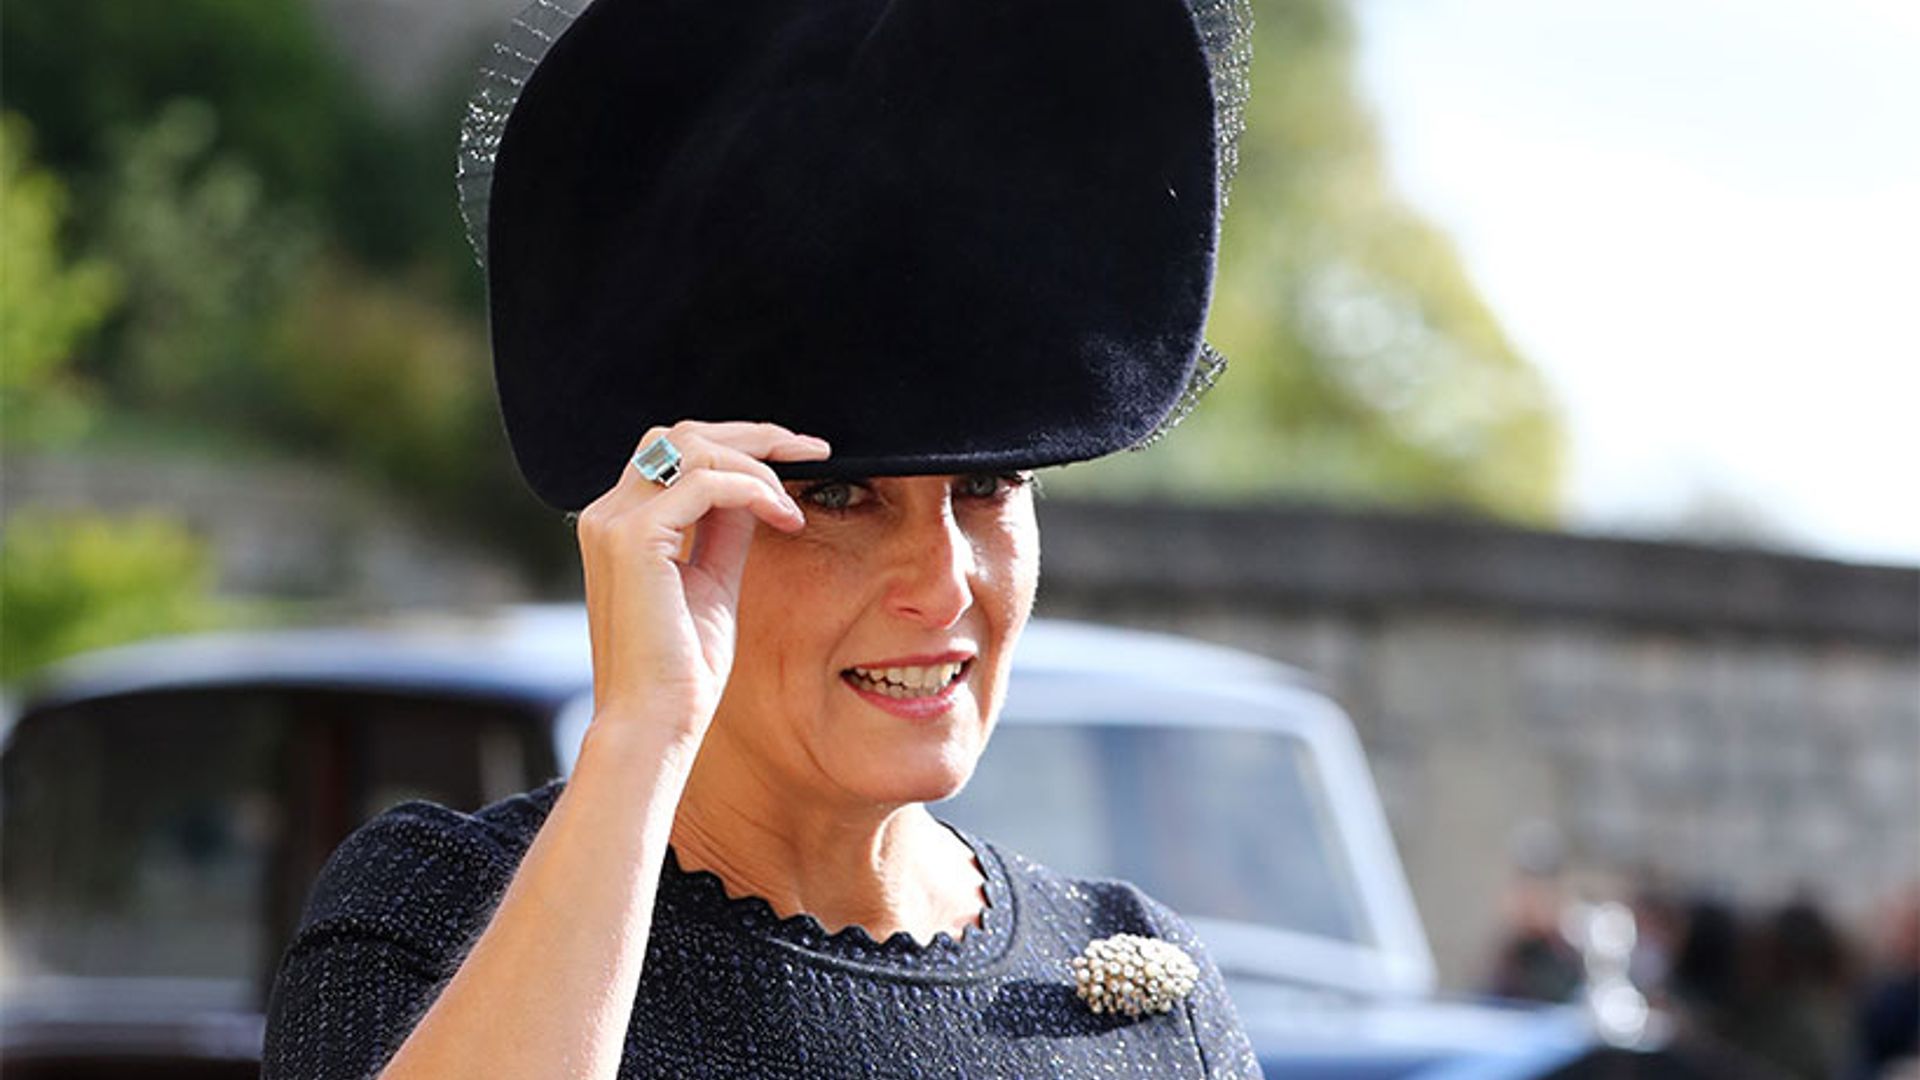 The Countess of Wessex wears a stunning Azzedine Alaia dress to the royal wedding of Princess Eugenie